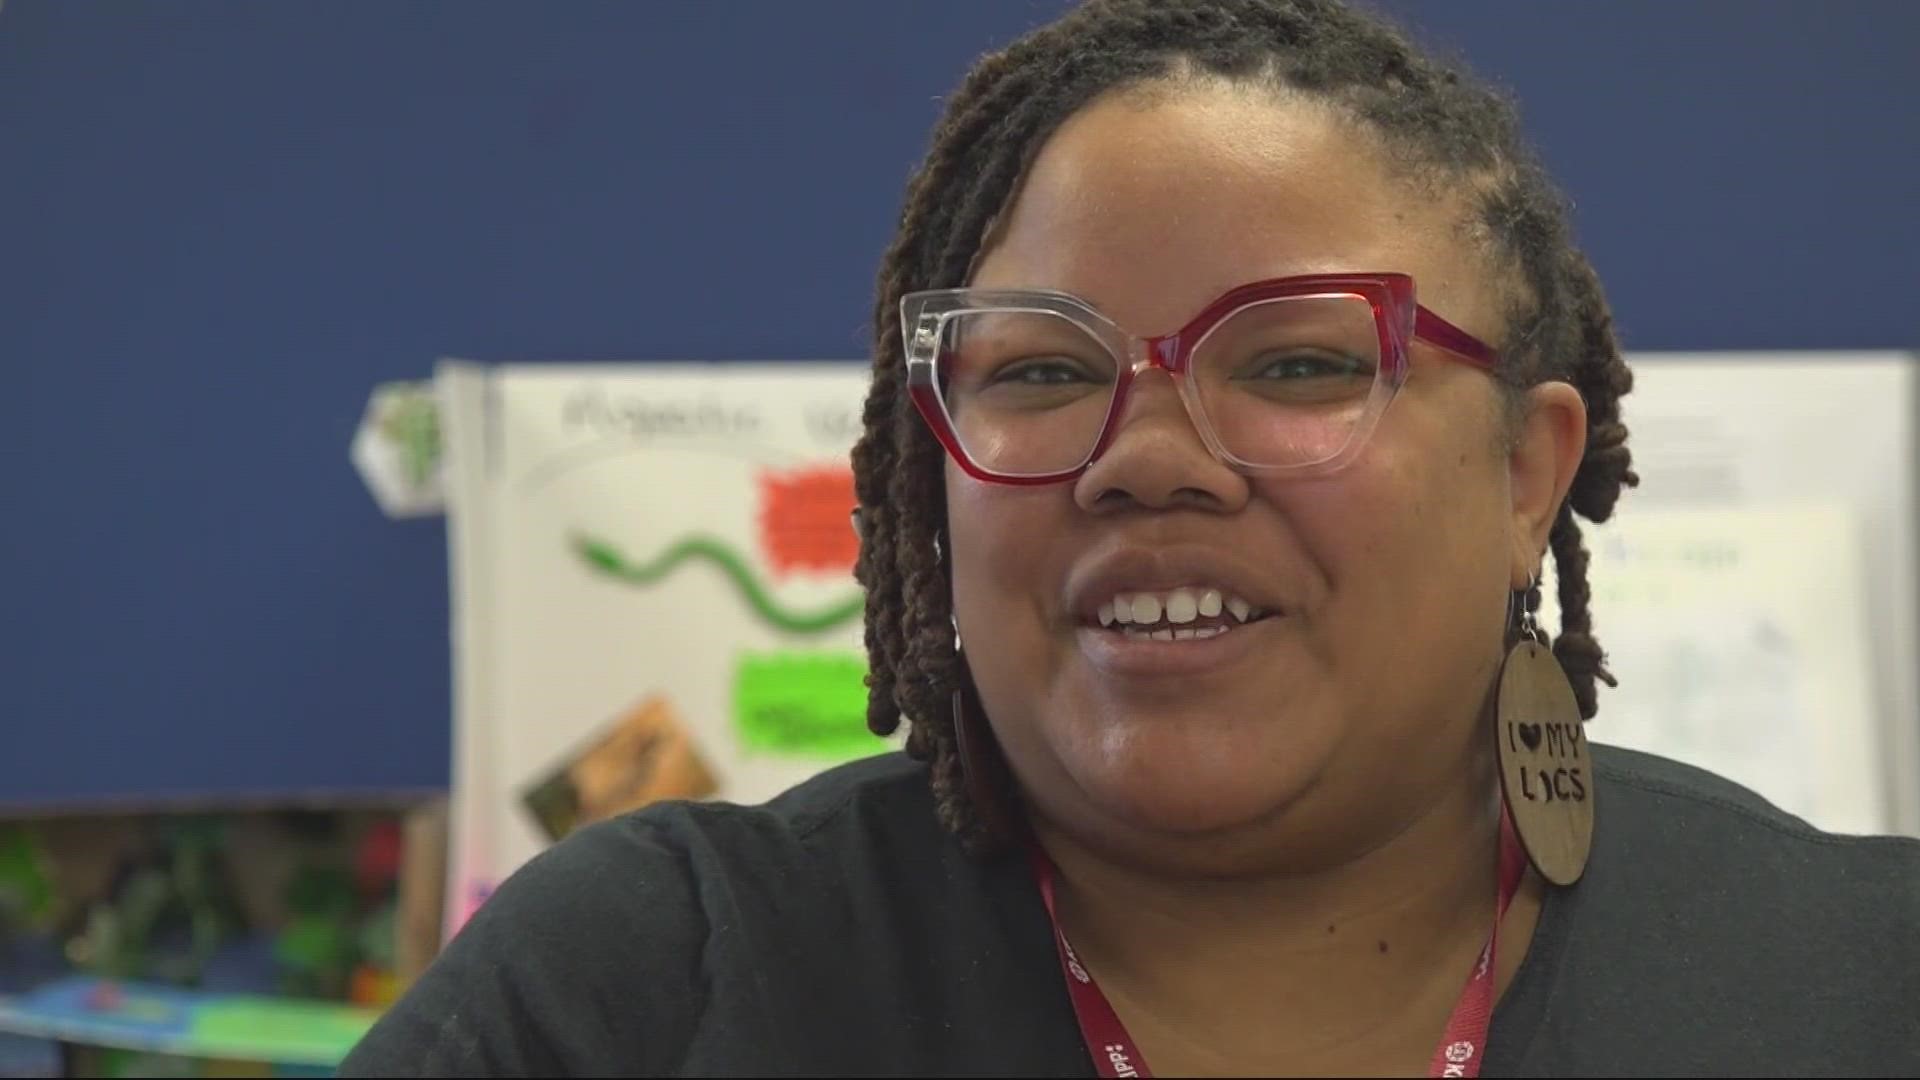 This week’s Teacher of the Week comes to us from KIPP Bessie Coleman Academy. She makes learning fun for students.